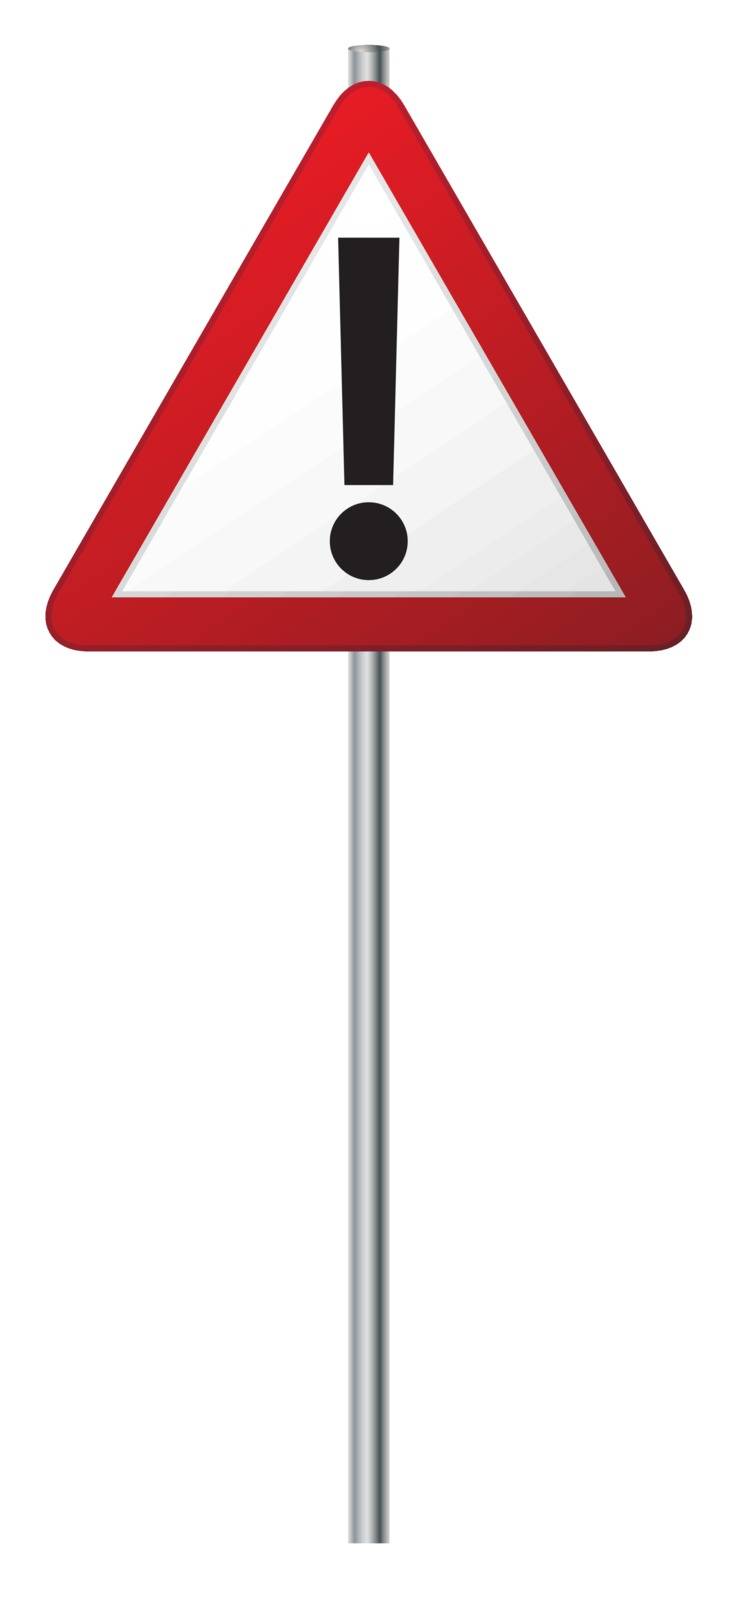 A triangular exclamation mark sign on a pole isolated on a white background